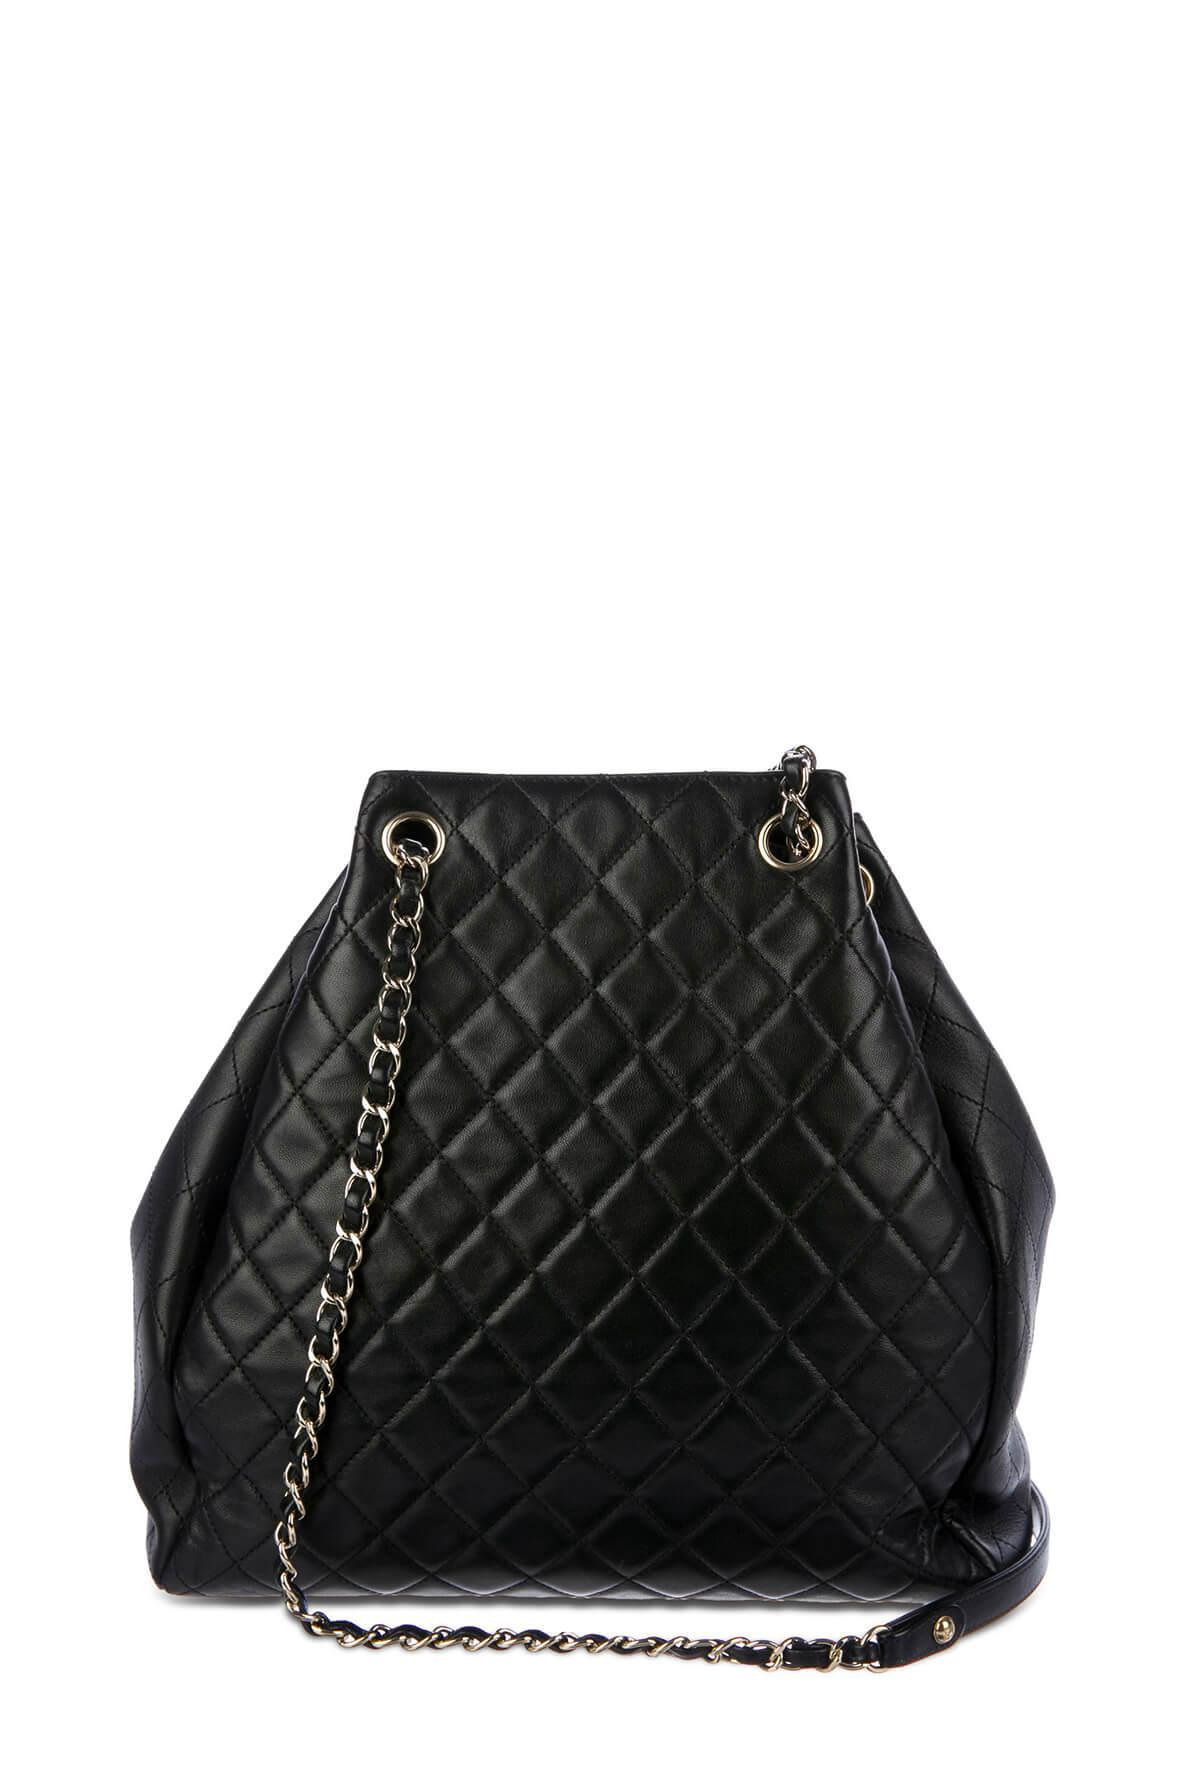 chanel black and white bucket bag leather